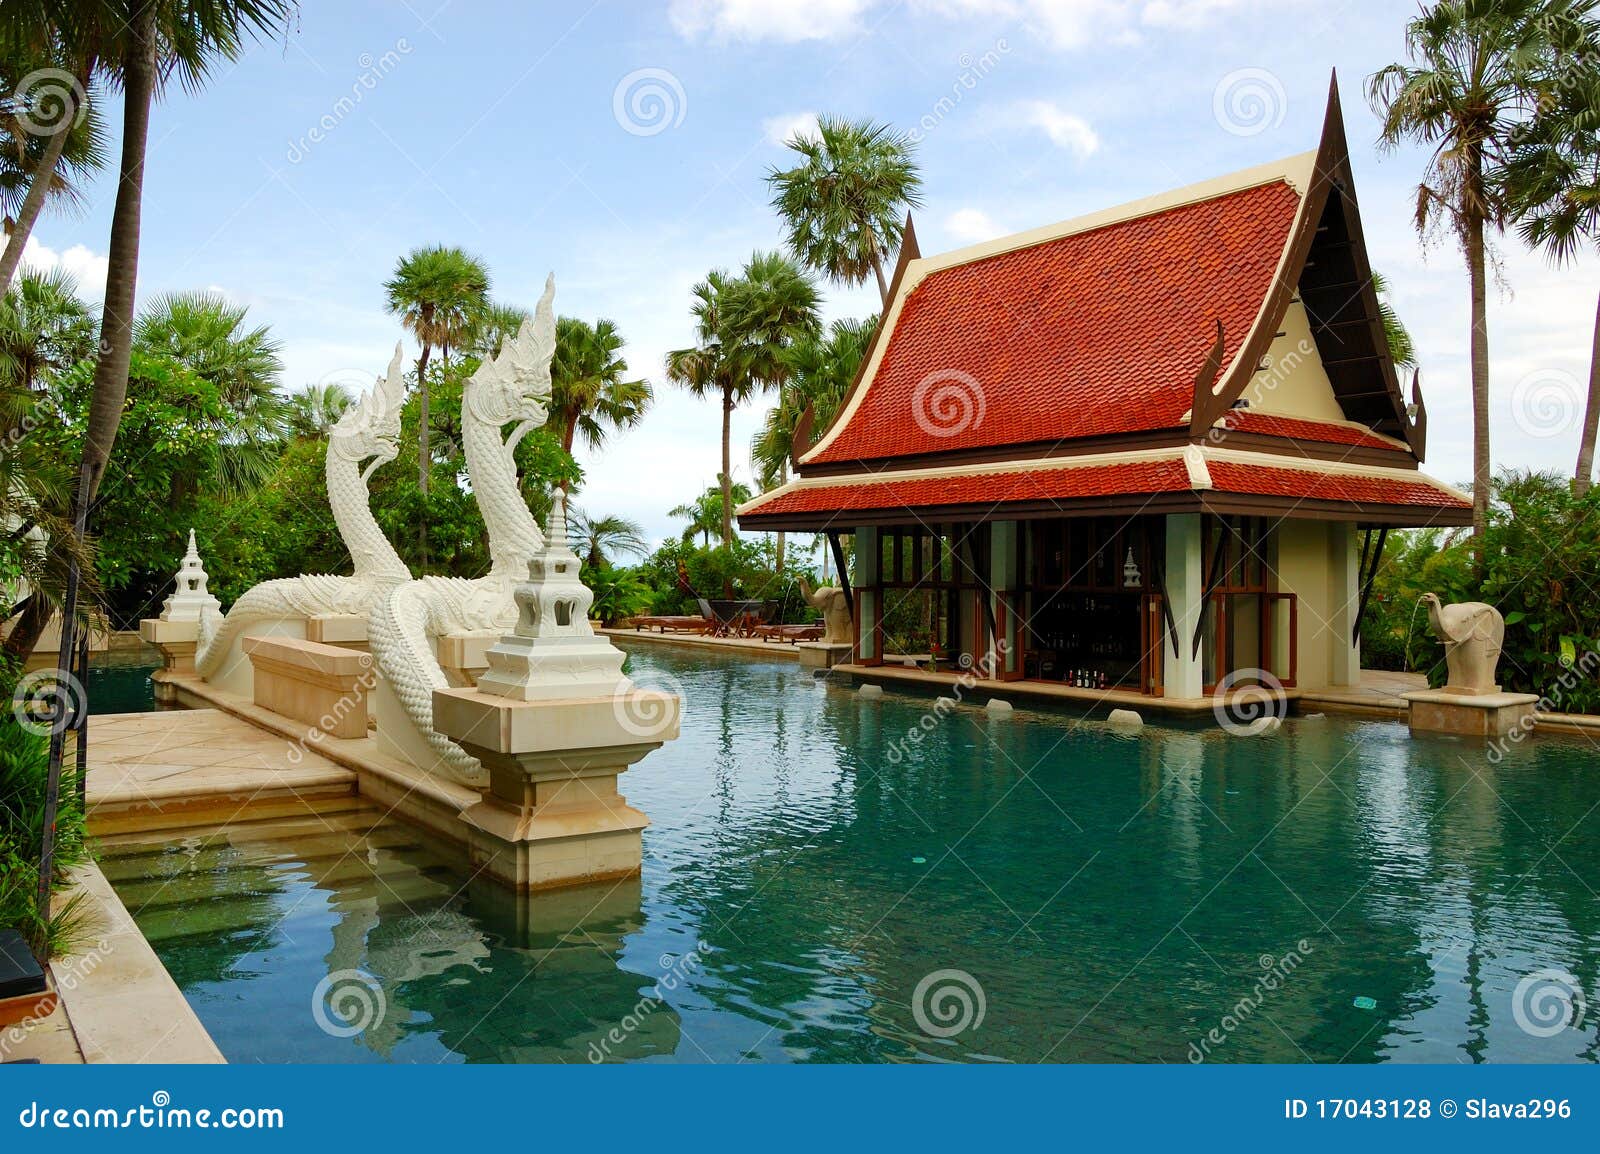 swimming pool and bar in tradional thai style